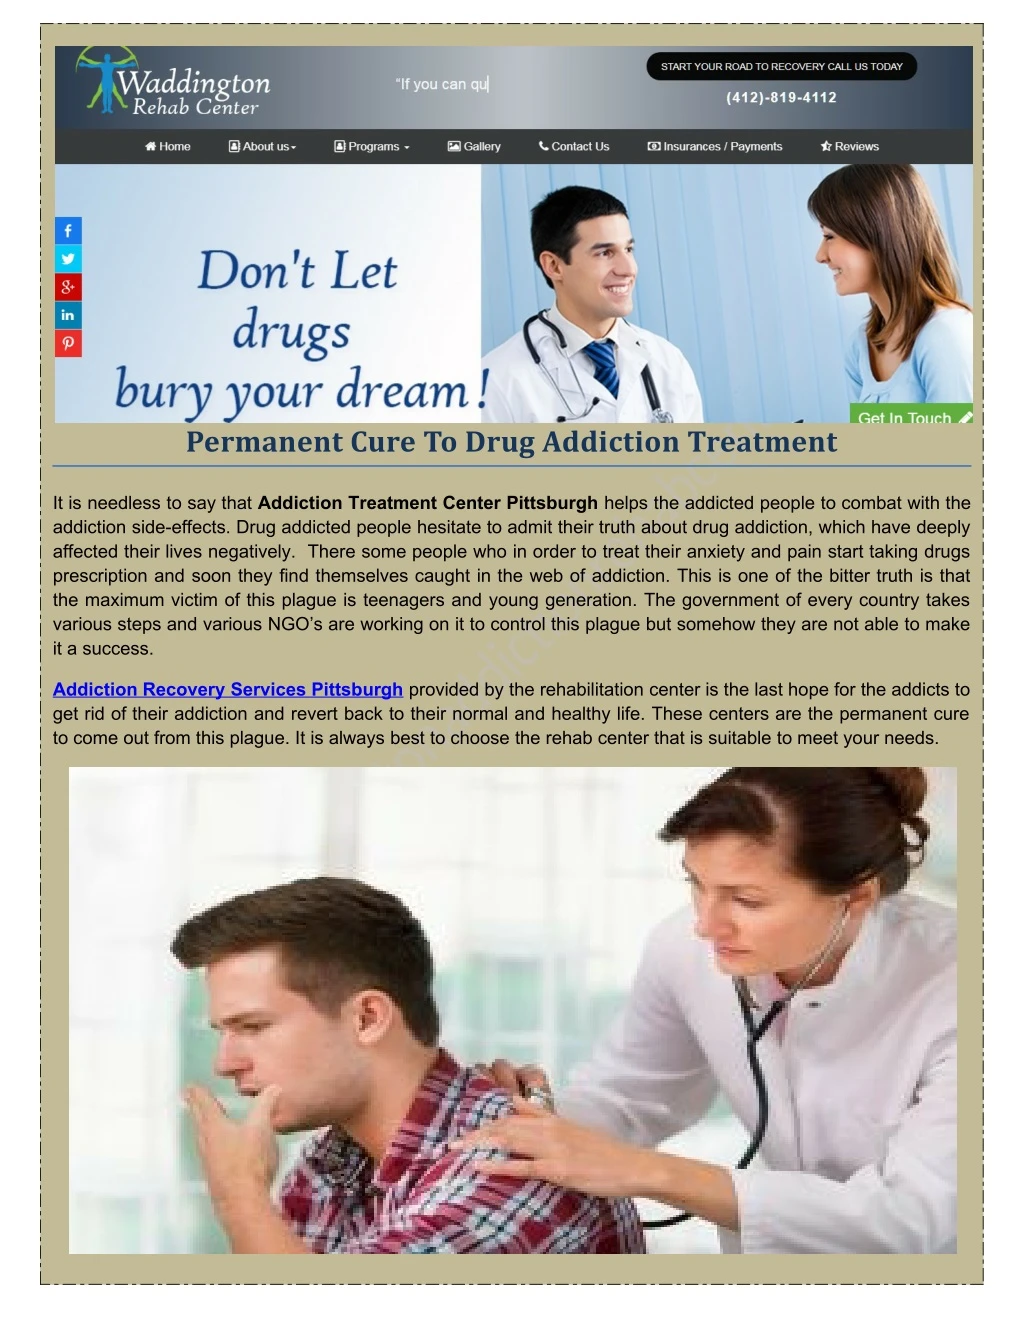 permanent cure to drug addiction treatment